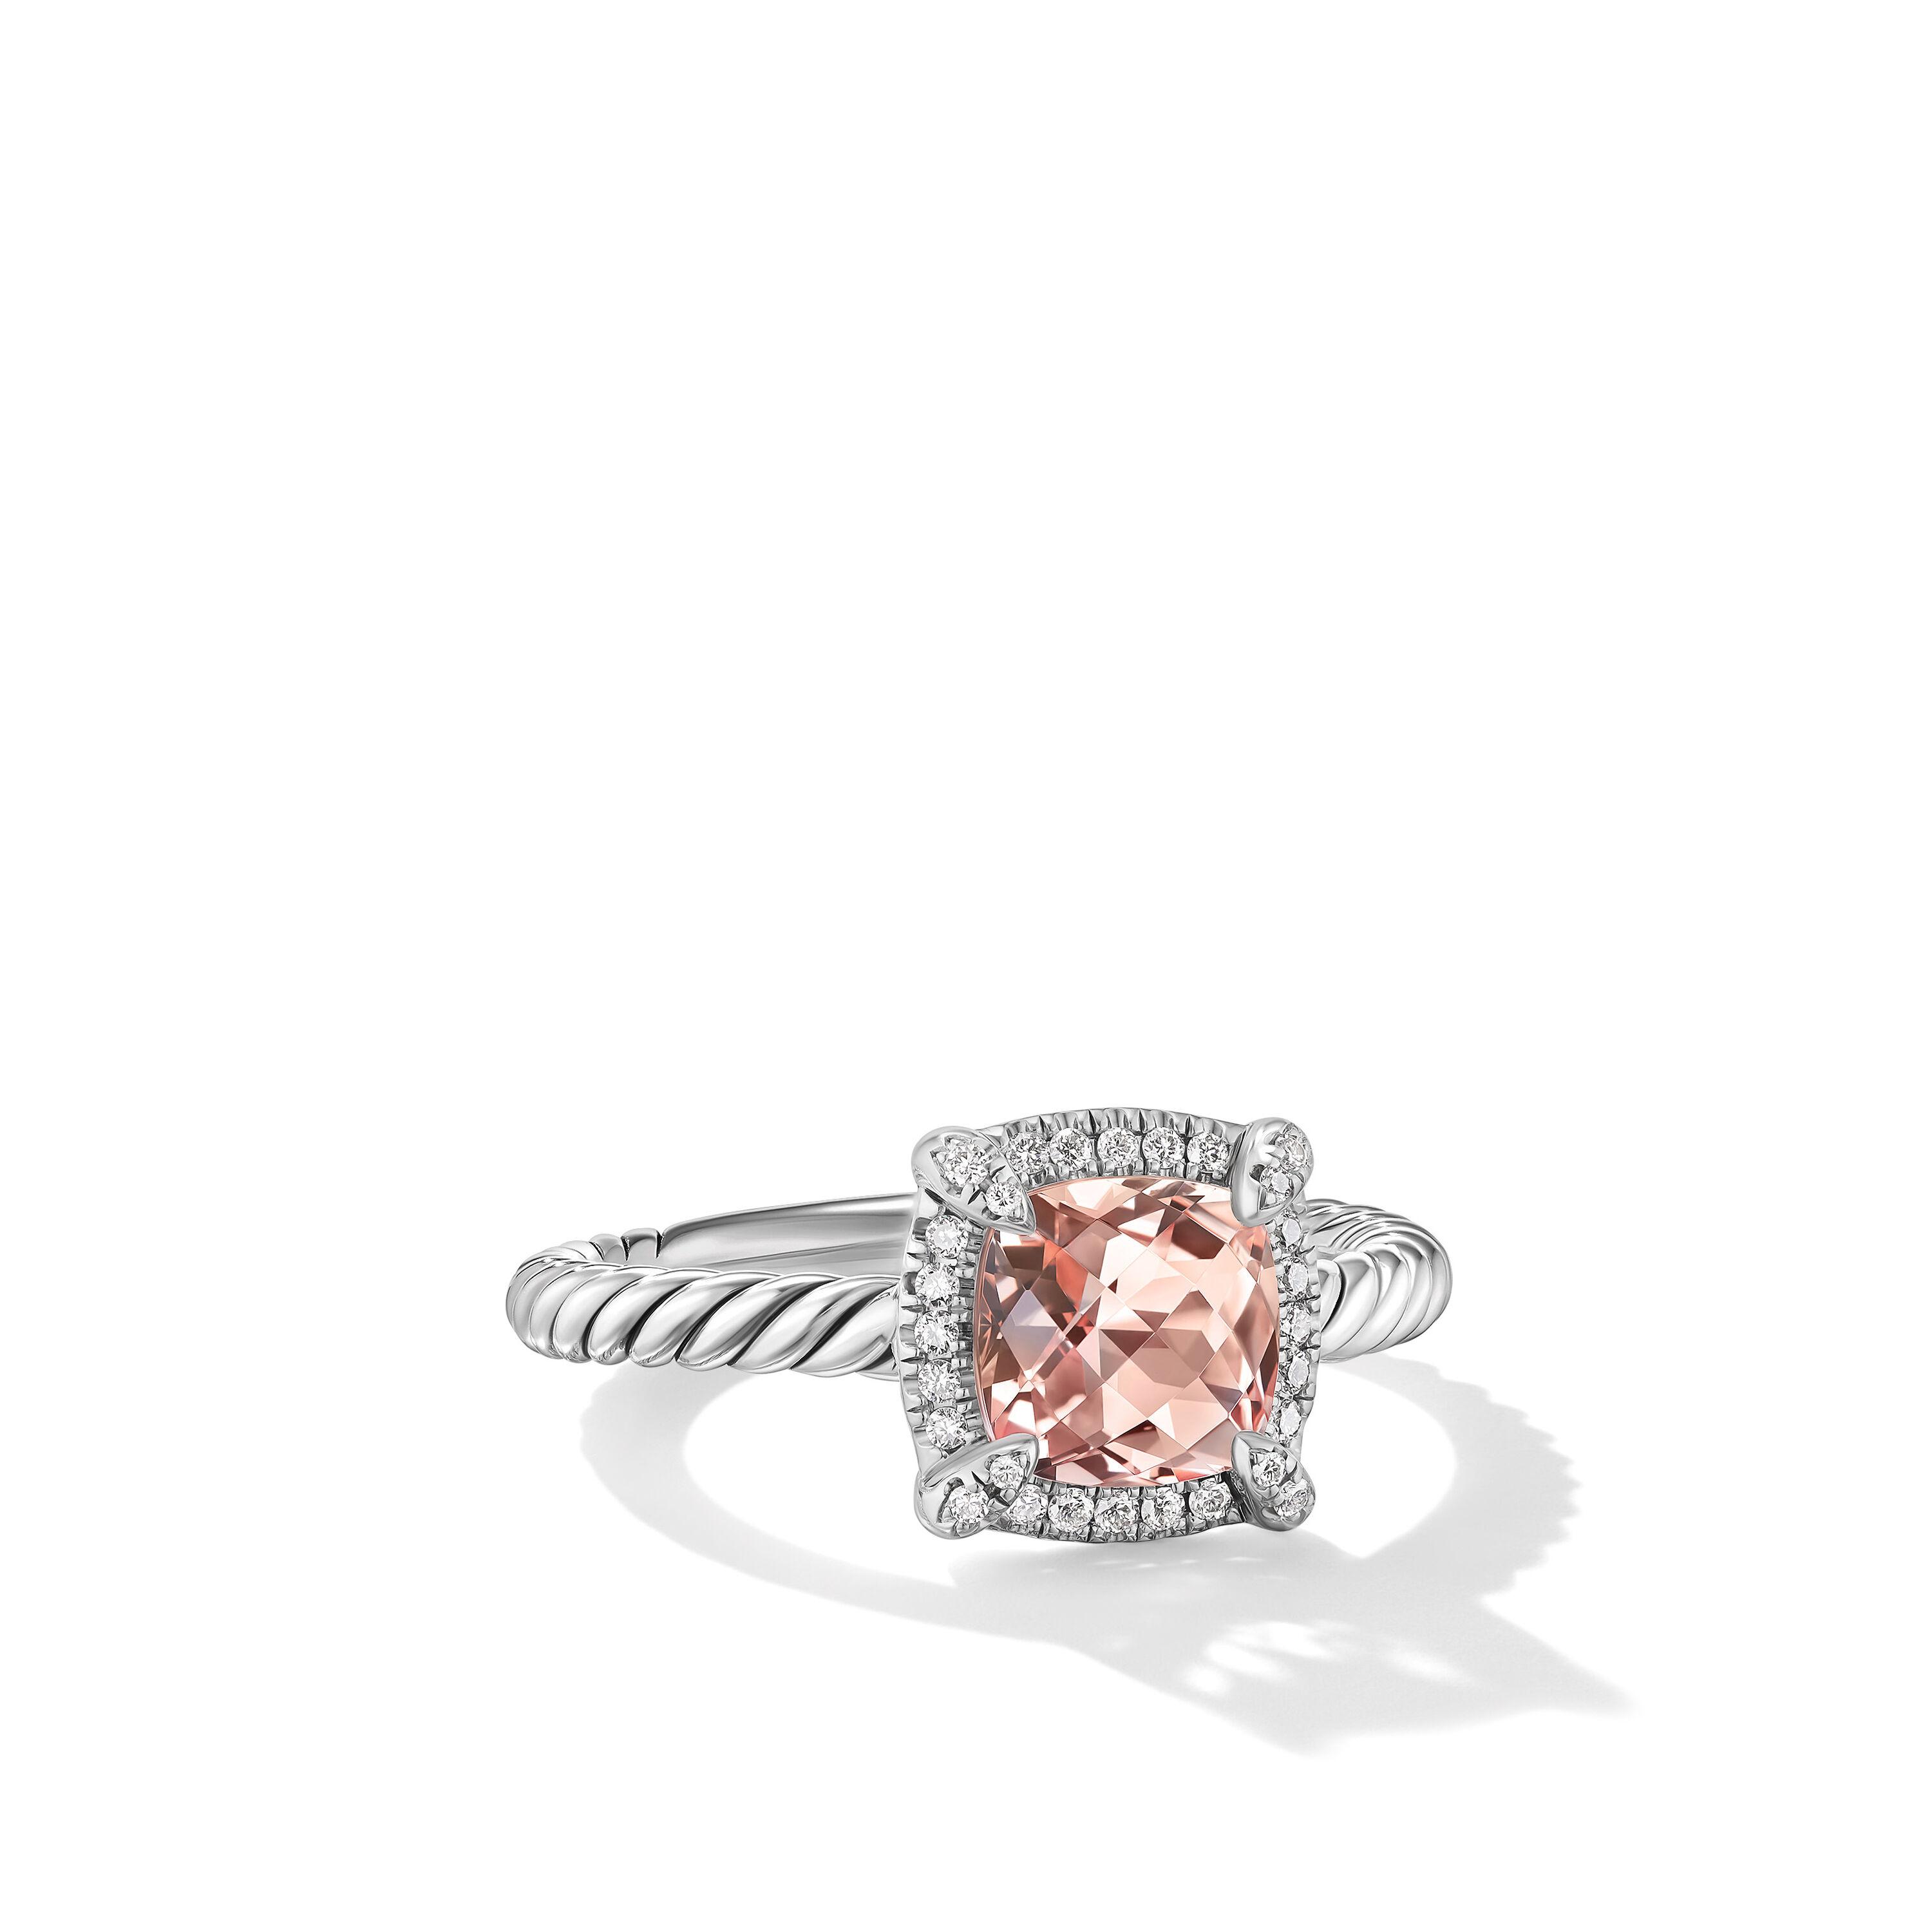 David Yurman Petite Chatelaine Pave Bezel Ring in Sterling Silver with Morganite and Diamonds, Size 6.5